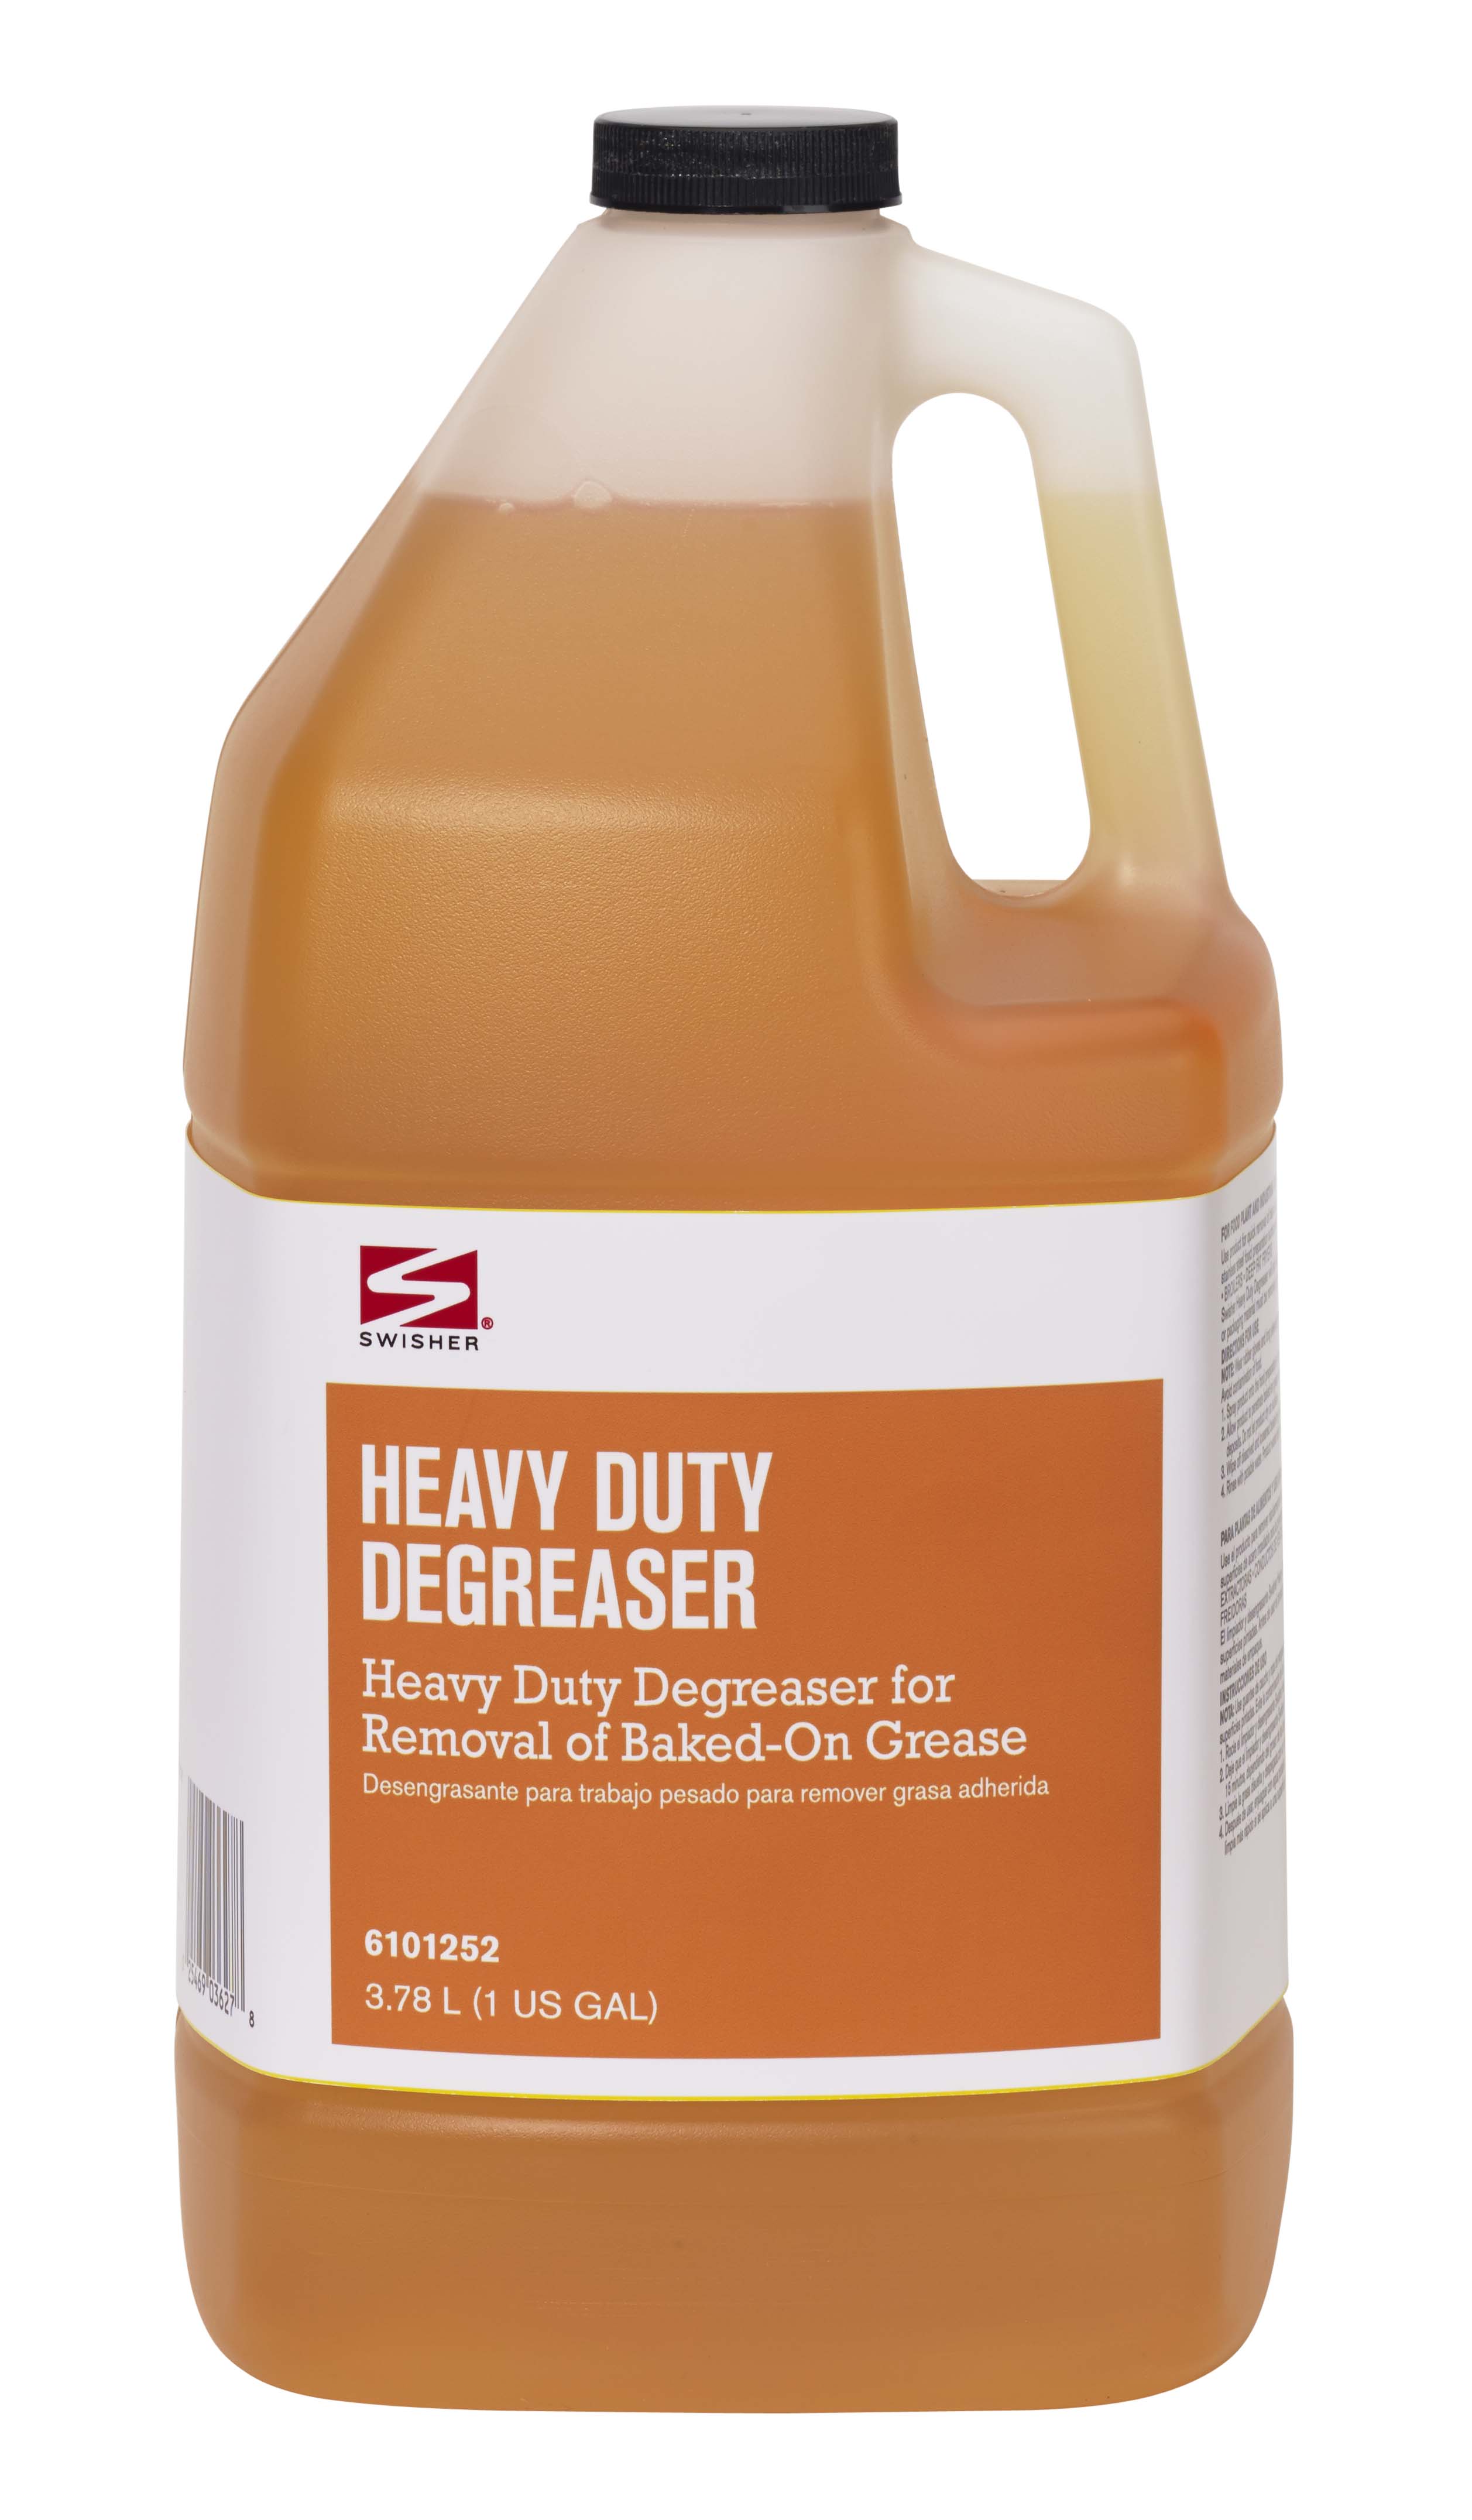 Clean Pro+ Heavy Duty Cleaner Degreaser H1 - 5 Litres